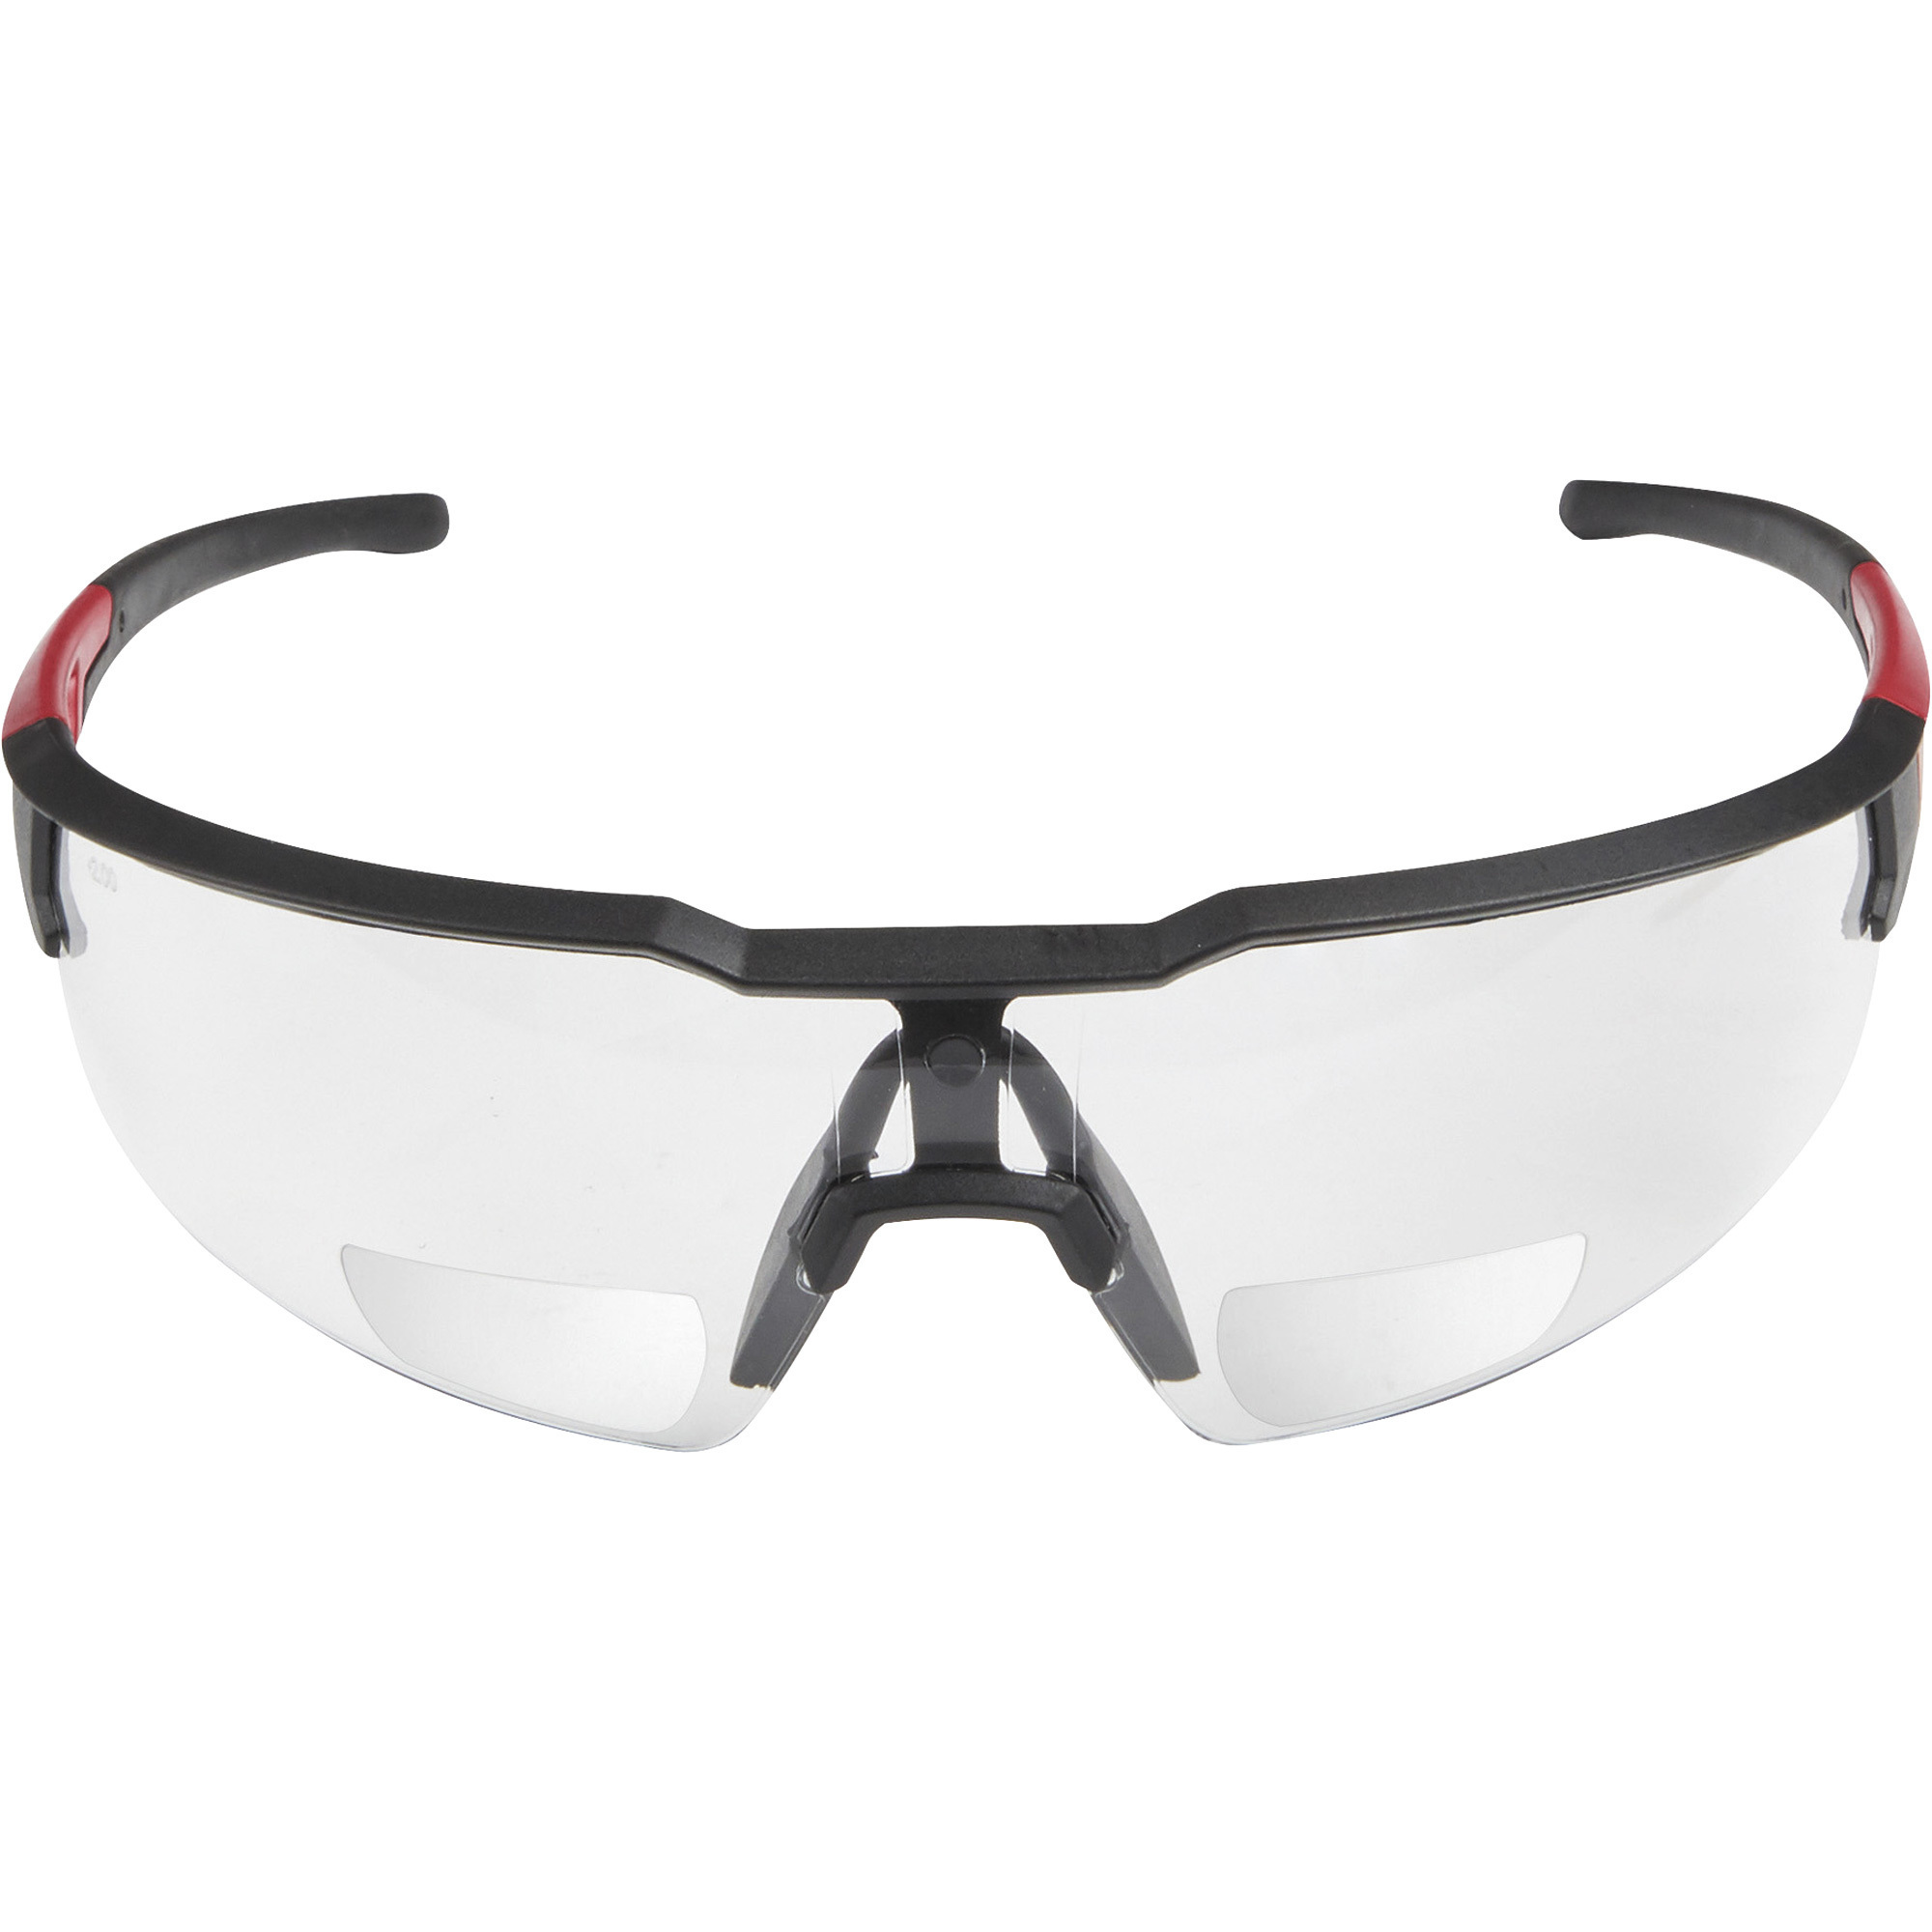 Milwaukee Anti-Scratch Magnifying Safety Glasses, +2.00 Magnification, Clear Lens, Black/Red Frame, Model 48-73-2204